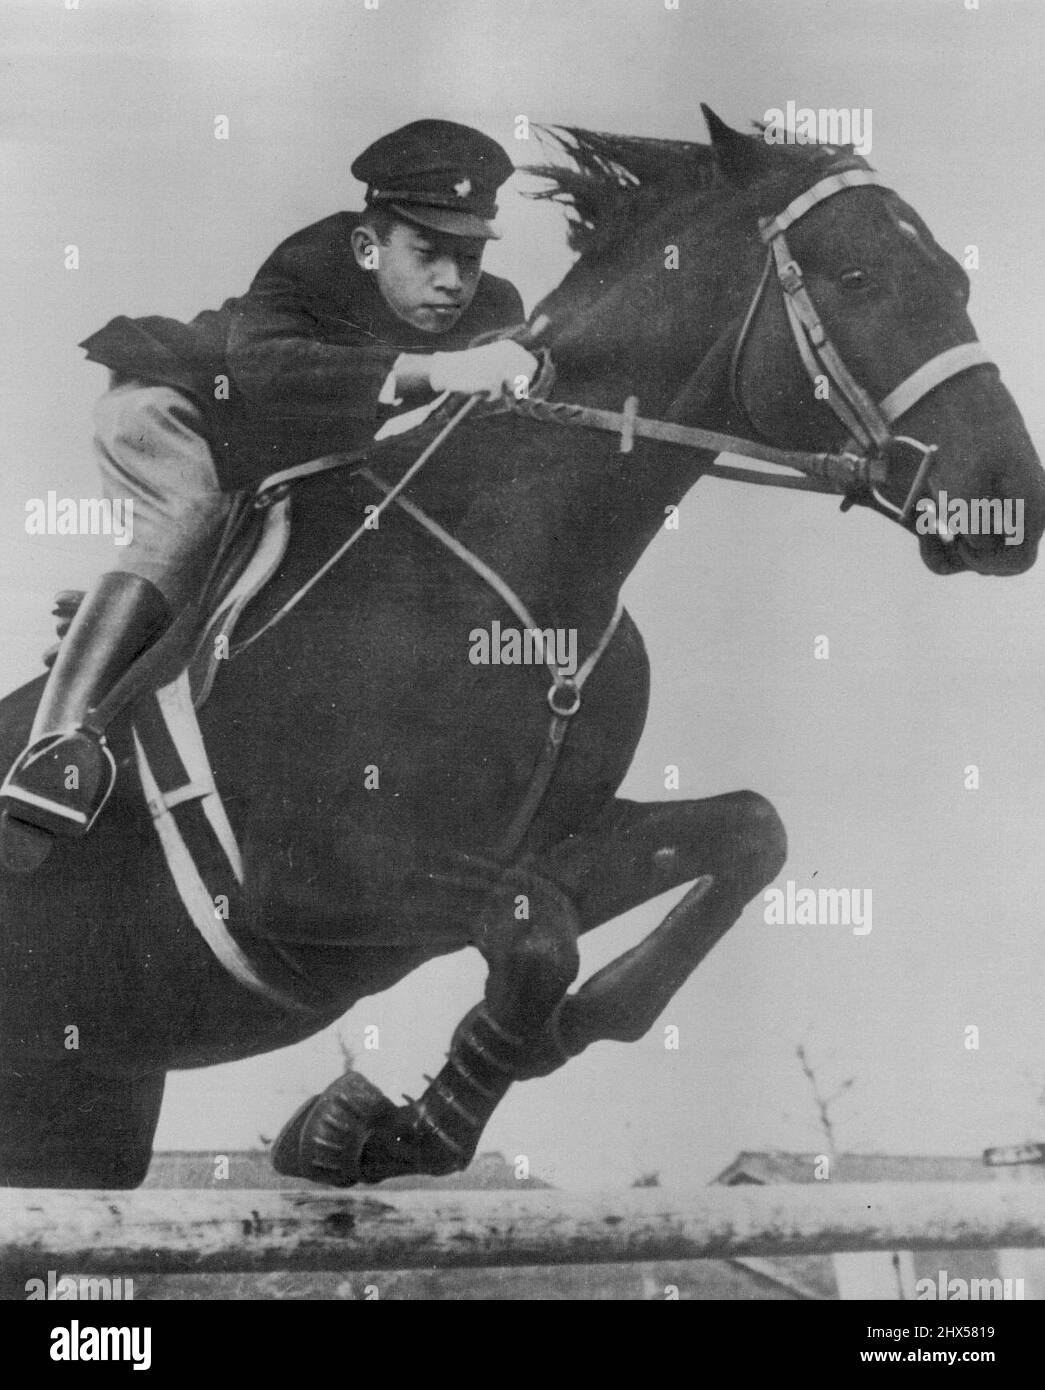 Crown Prince Akihito, 18-year-old son of Japanese Emperor Hirohito, gives a display of horsemanship as he rides his pet horse 'Wakazakura' over an obstacle in Tokyo. This picture was taken by photographer of the Japanese Imperial household. December 31, 1951. (Photo by AP Wirephoto). Stock Photo